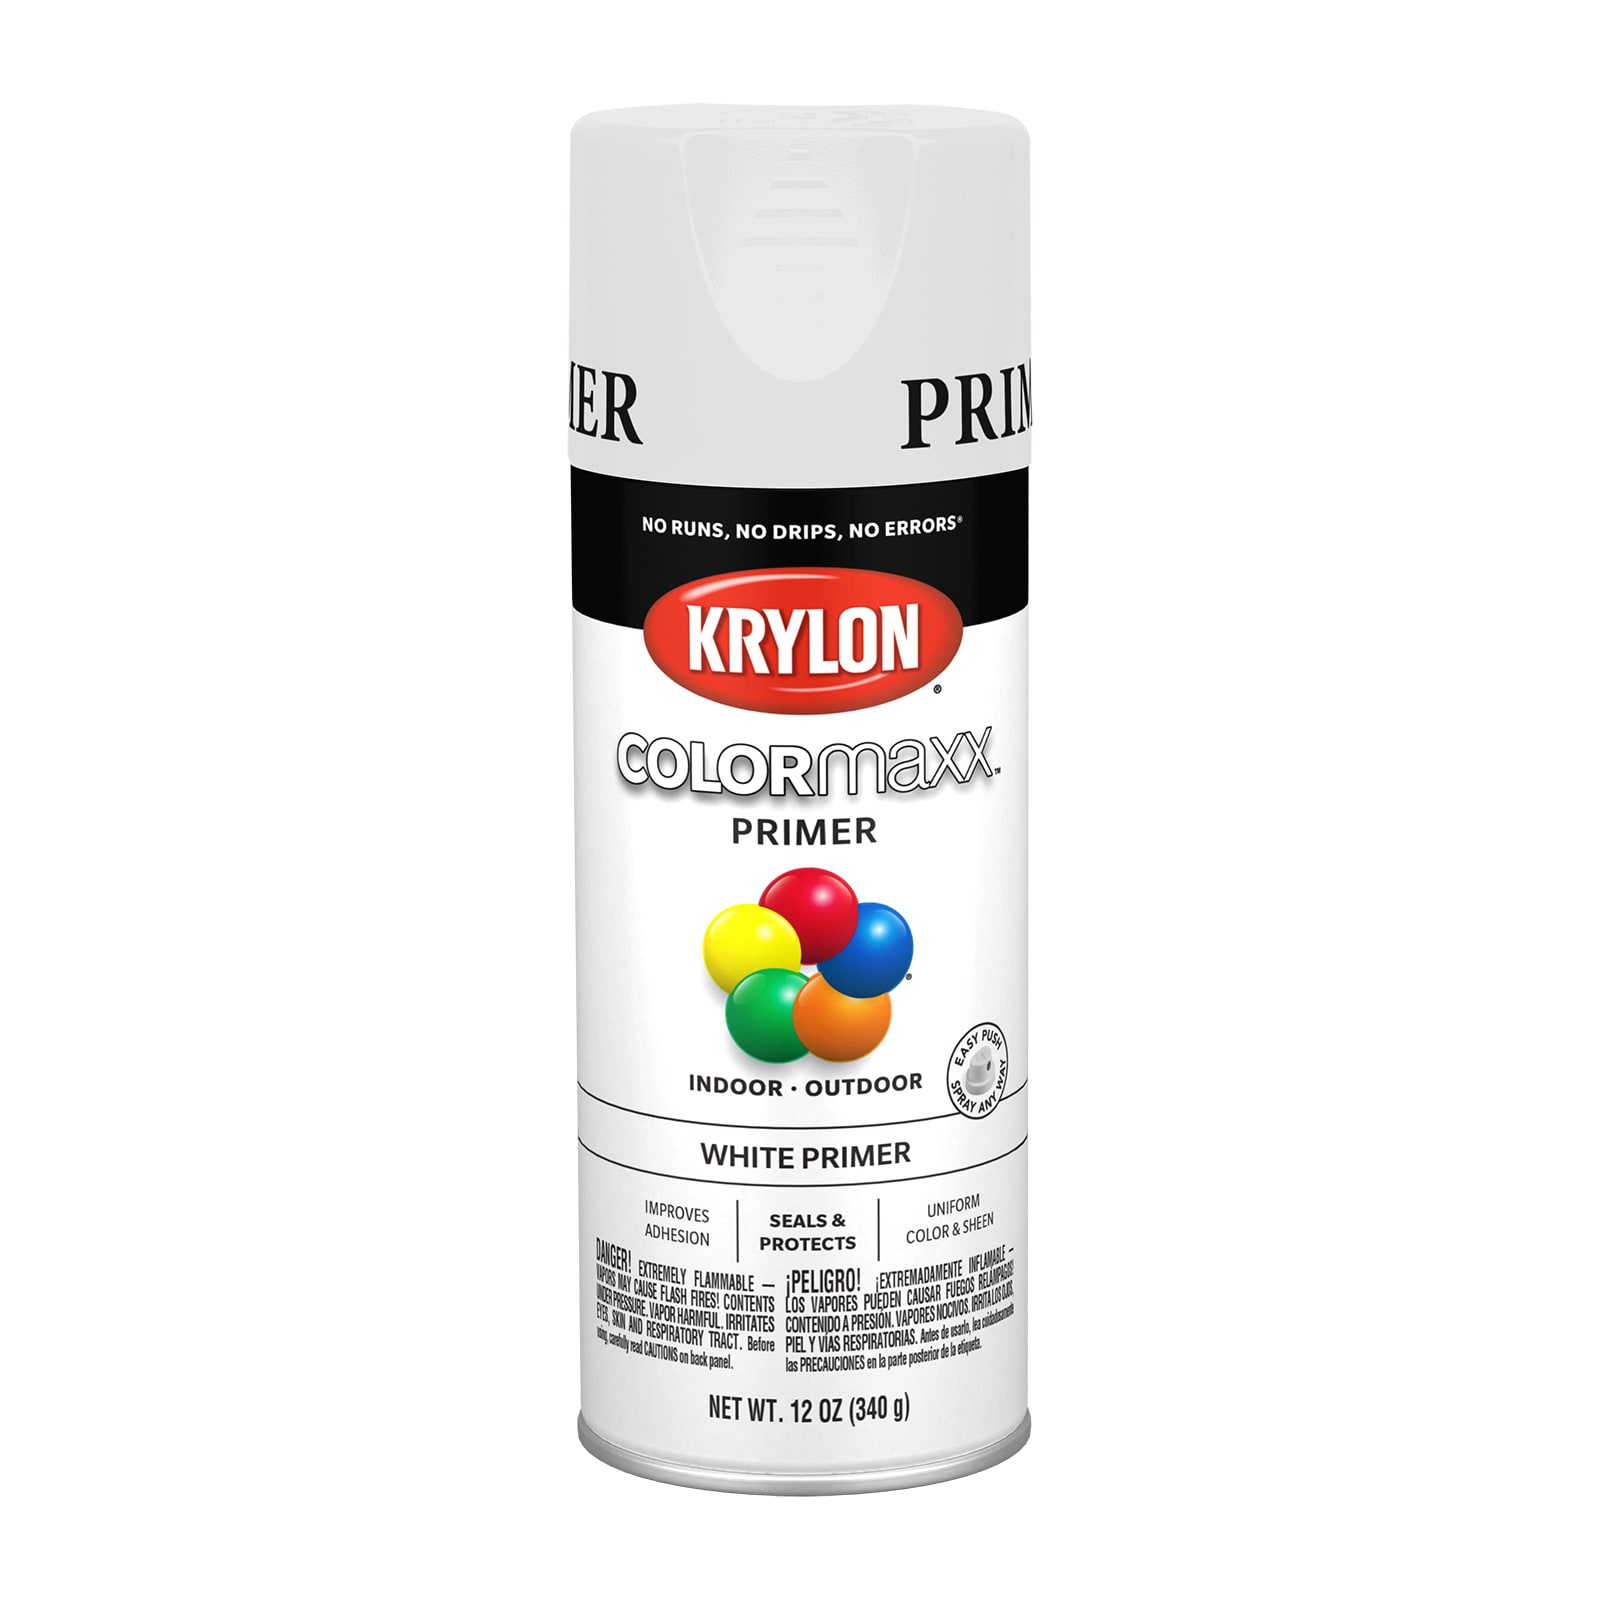 Krylon COLORmaxx Flat Crystal Clear Spray Paint and Primer In One (NET WT.  11-oz ) in the Spray Paint department at